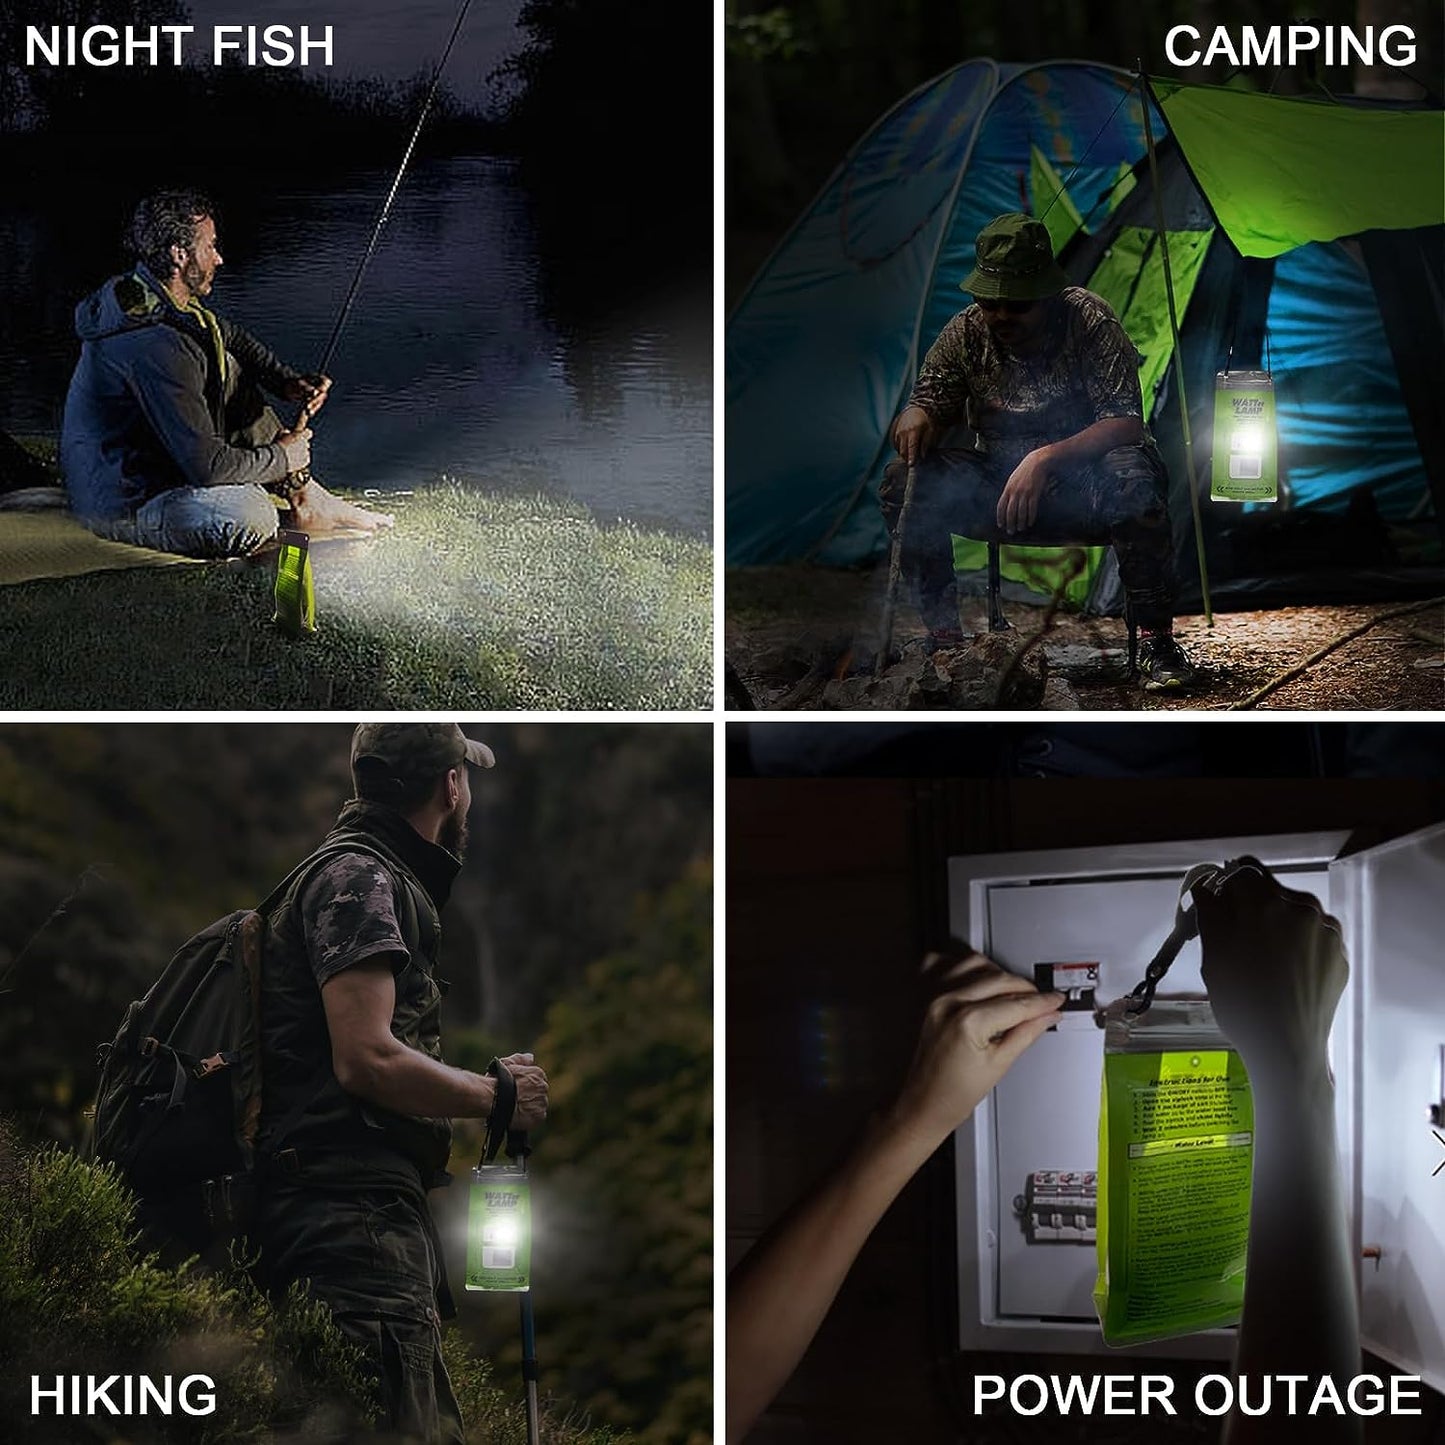 Emergency Light Salt Water Lamp, No Battery Required Portable Lantern for Hiking,Camping Essentials Survival Gear Outdoor Lamp for Power Outages Outdoor Activities Night Fishing Camping